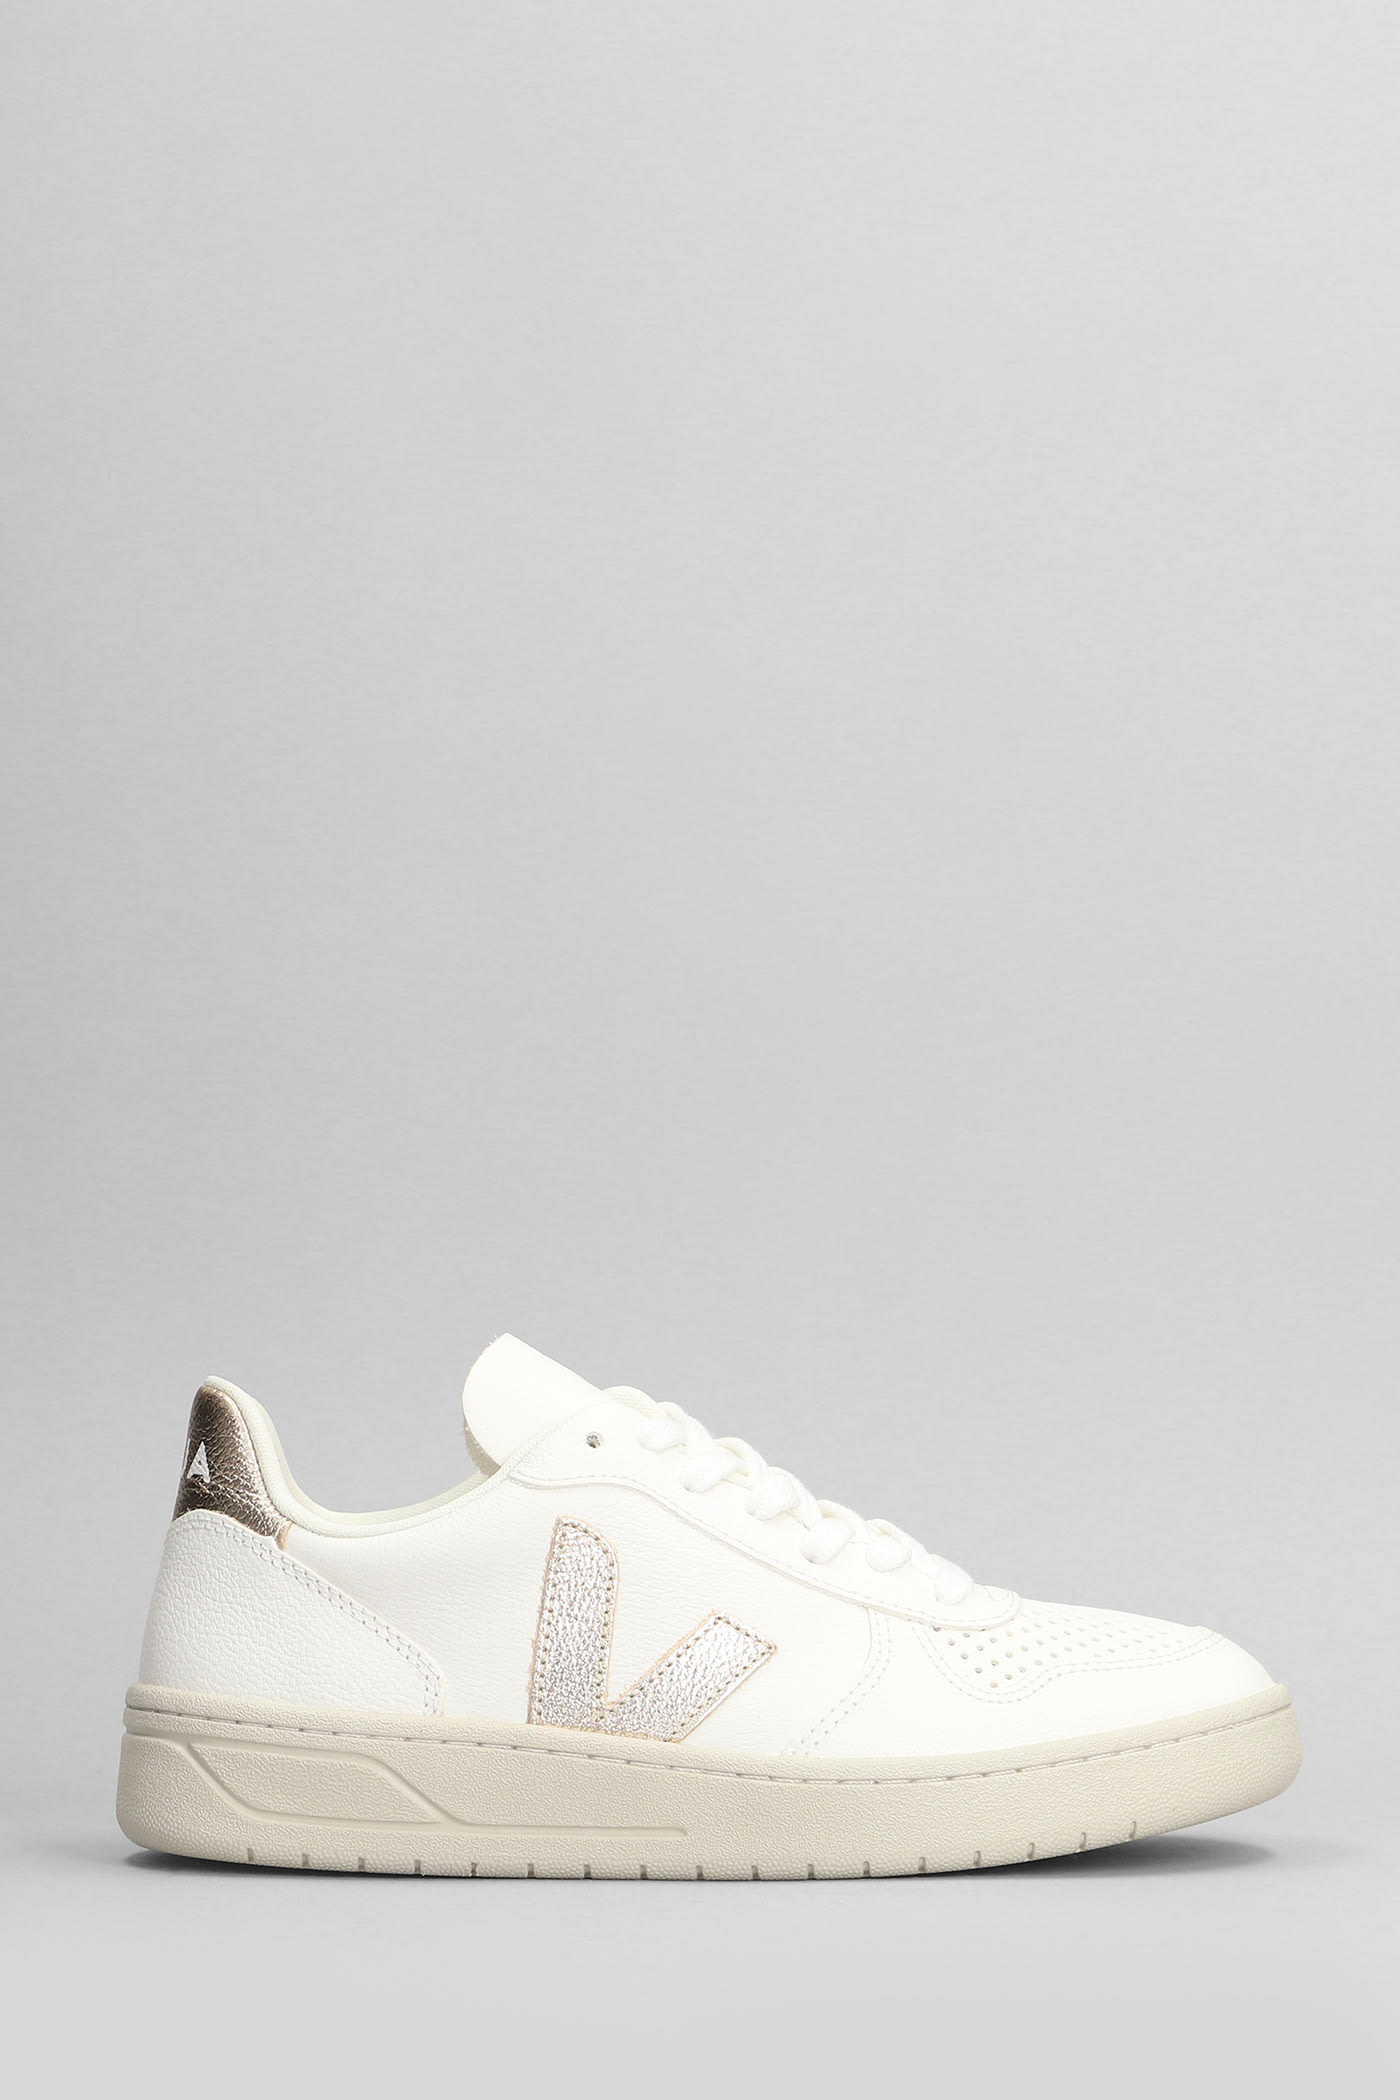 V-10 Sneakers In White Leather